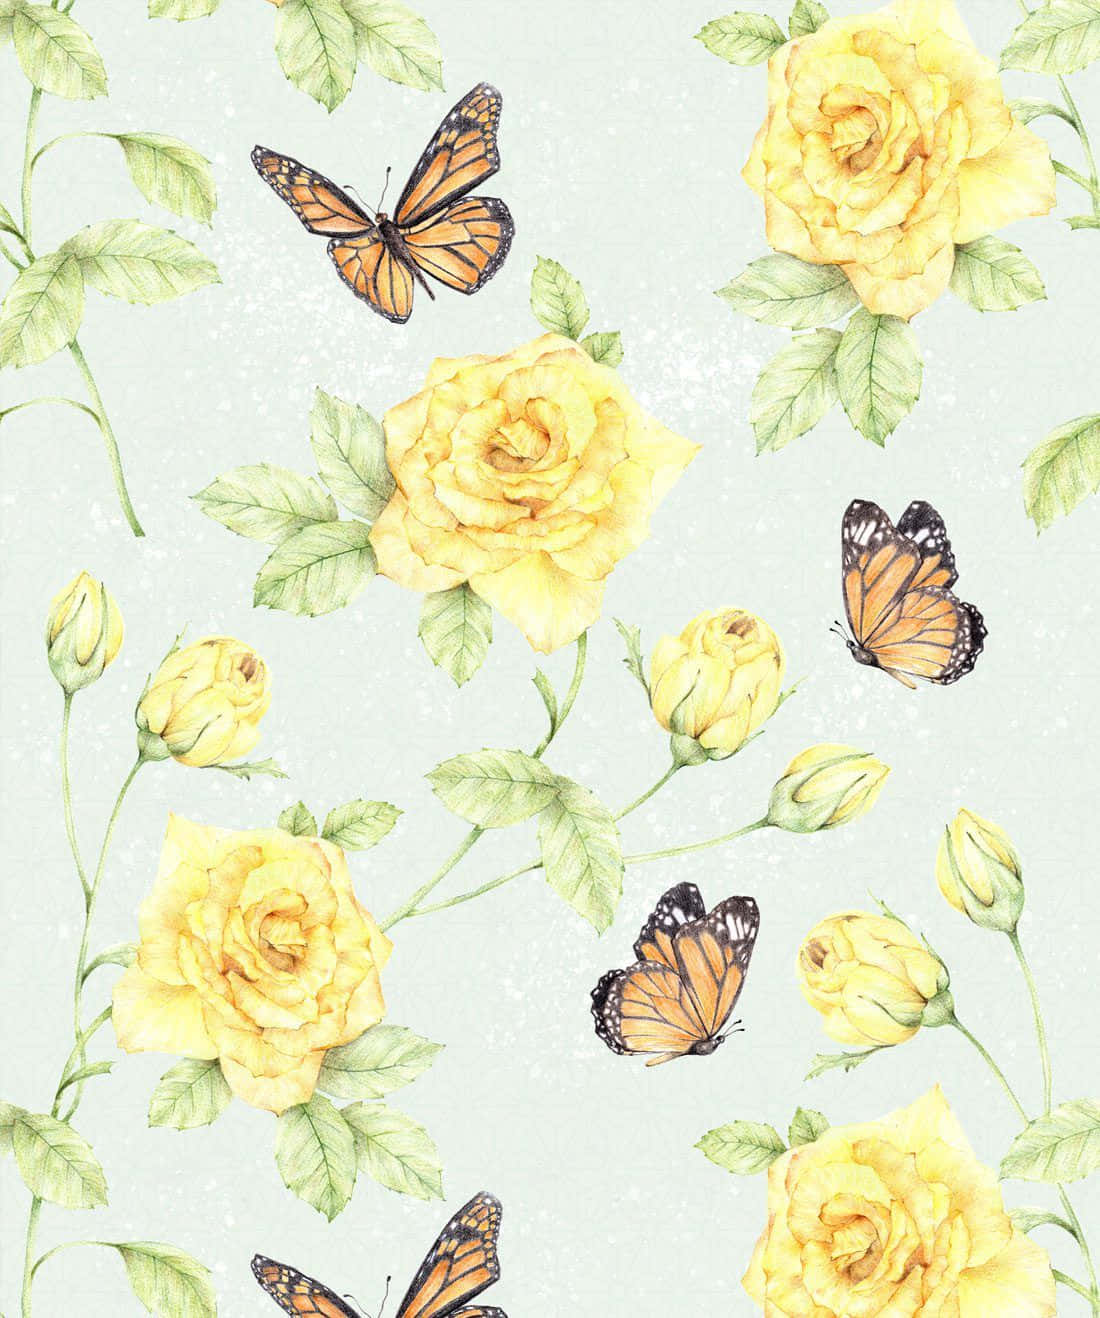 A vast collection of adorable yellow butterflies flying together Wallpaper